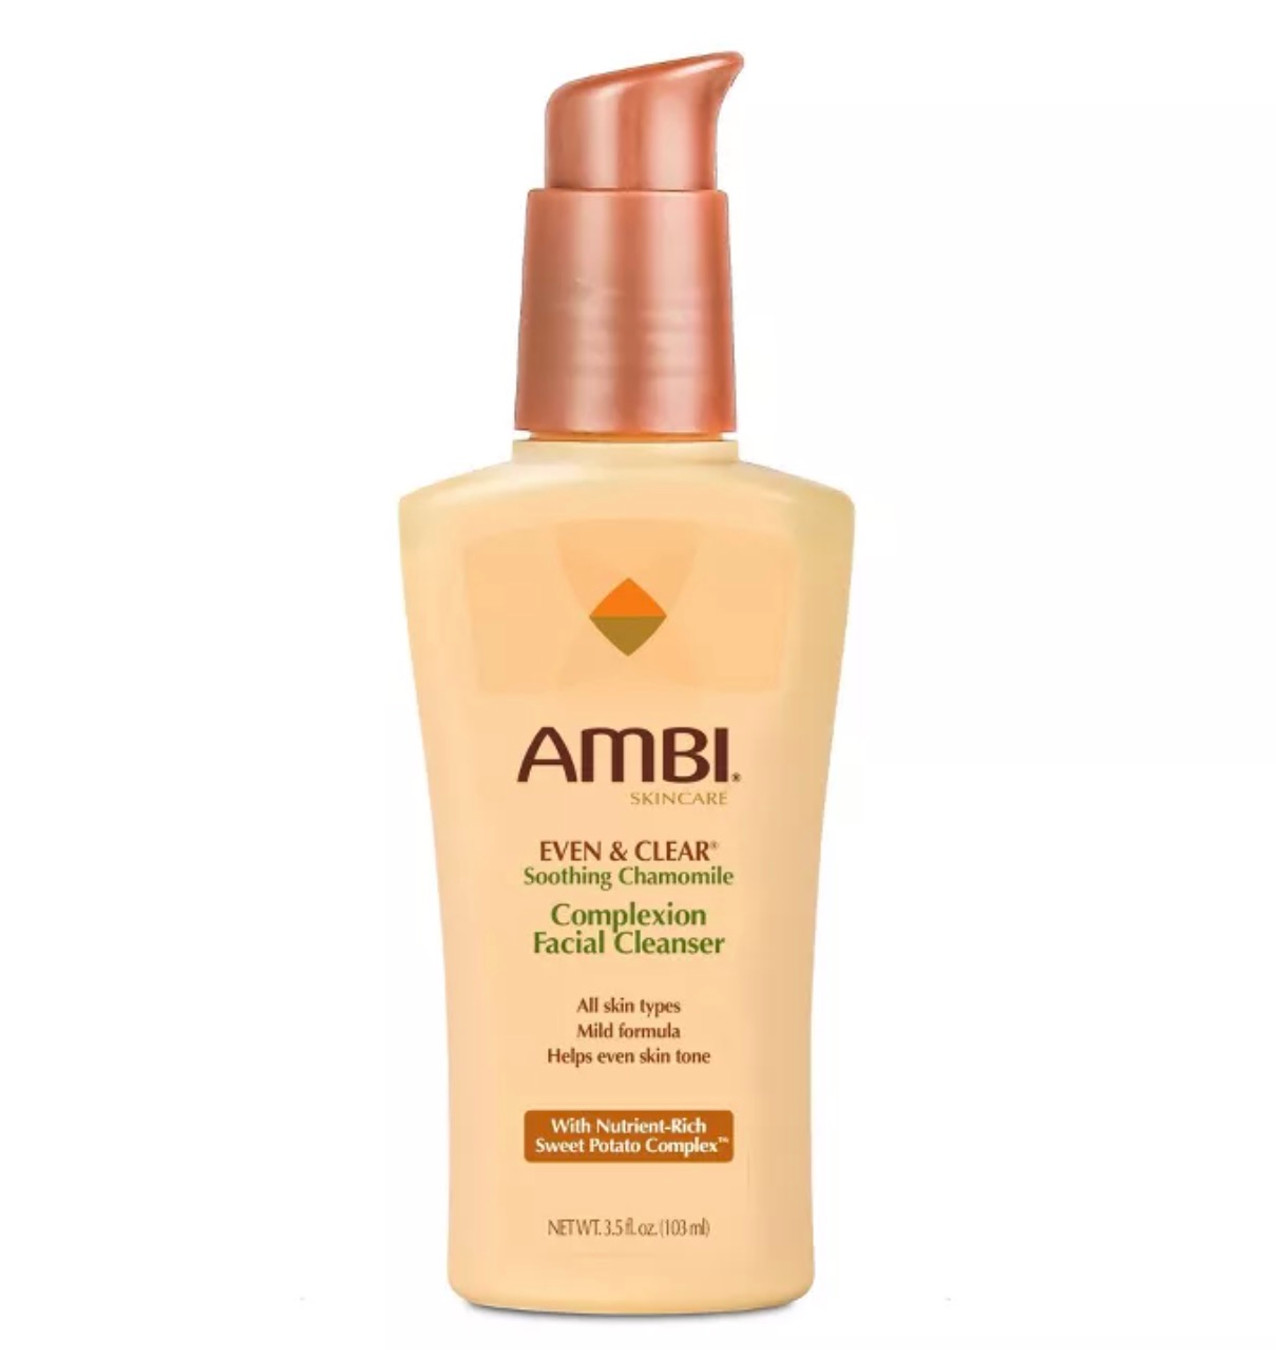 Ambi Even & Clear Soothing Chamomile Complexion Facial Cleanser (3.5 oz)